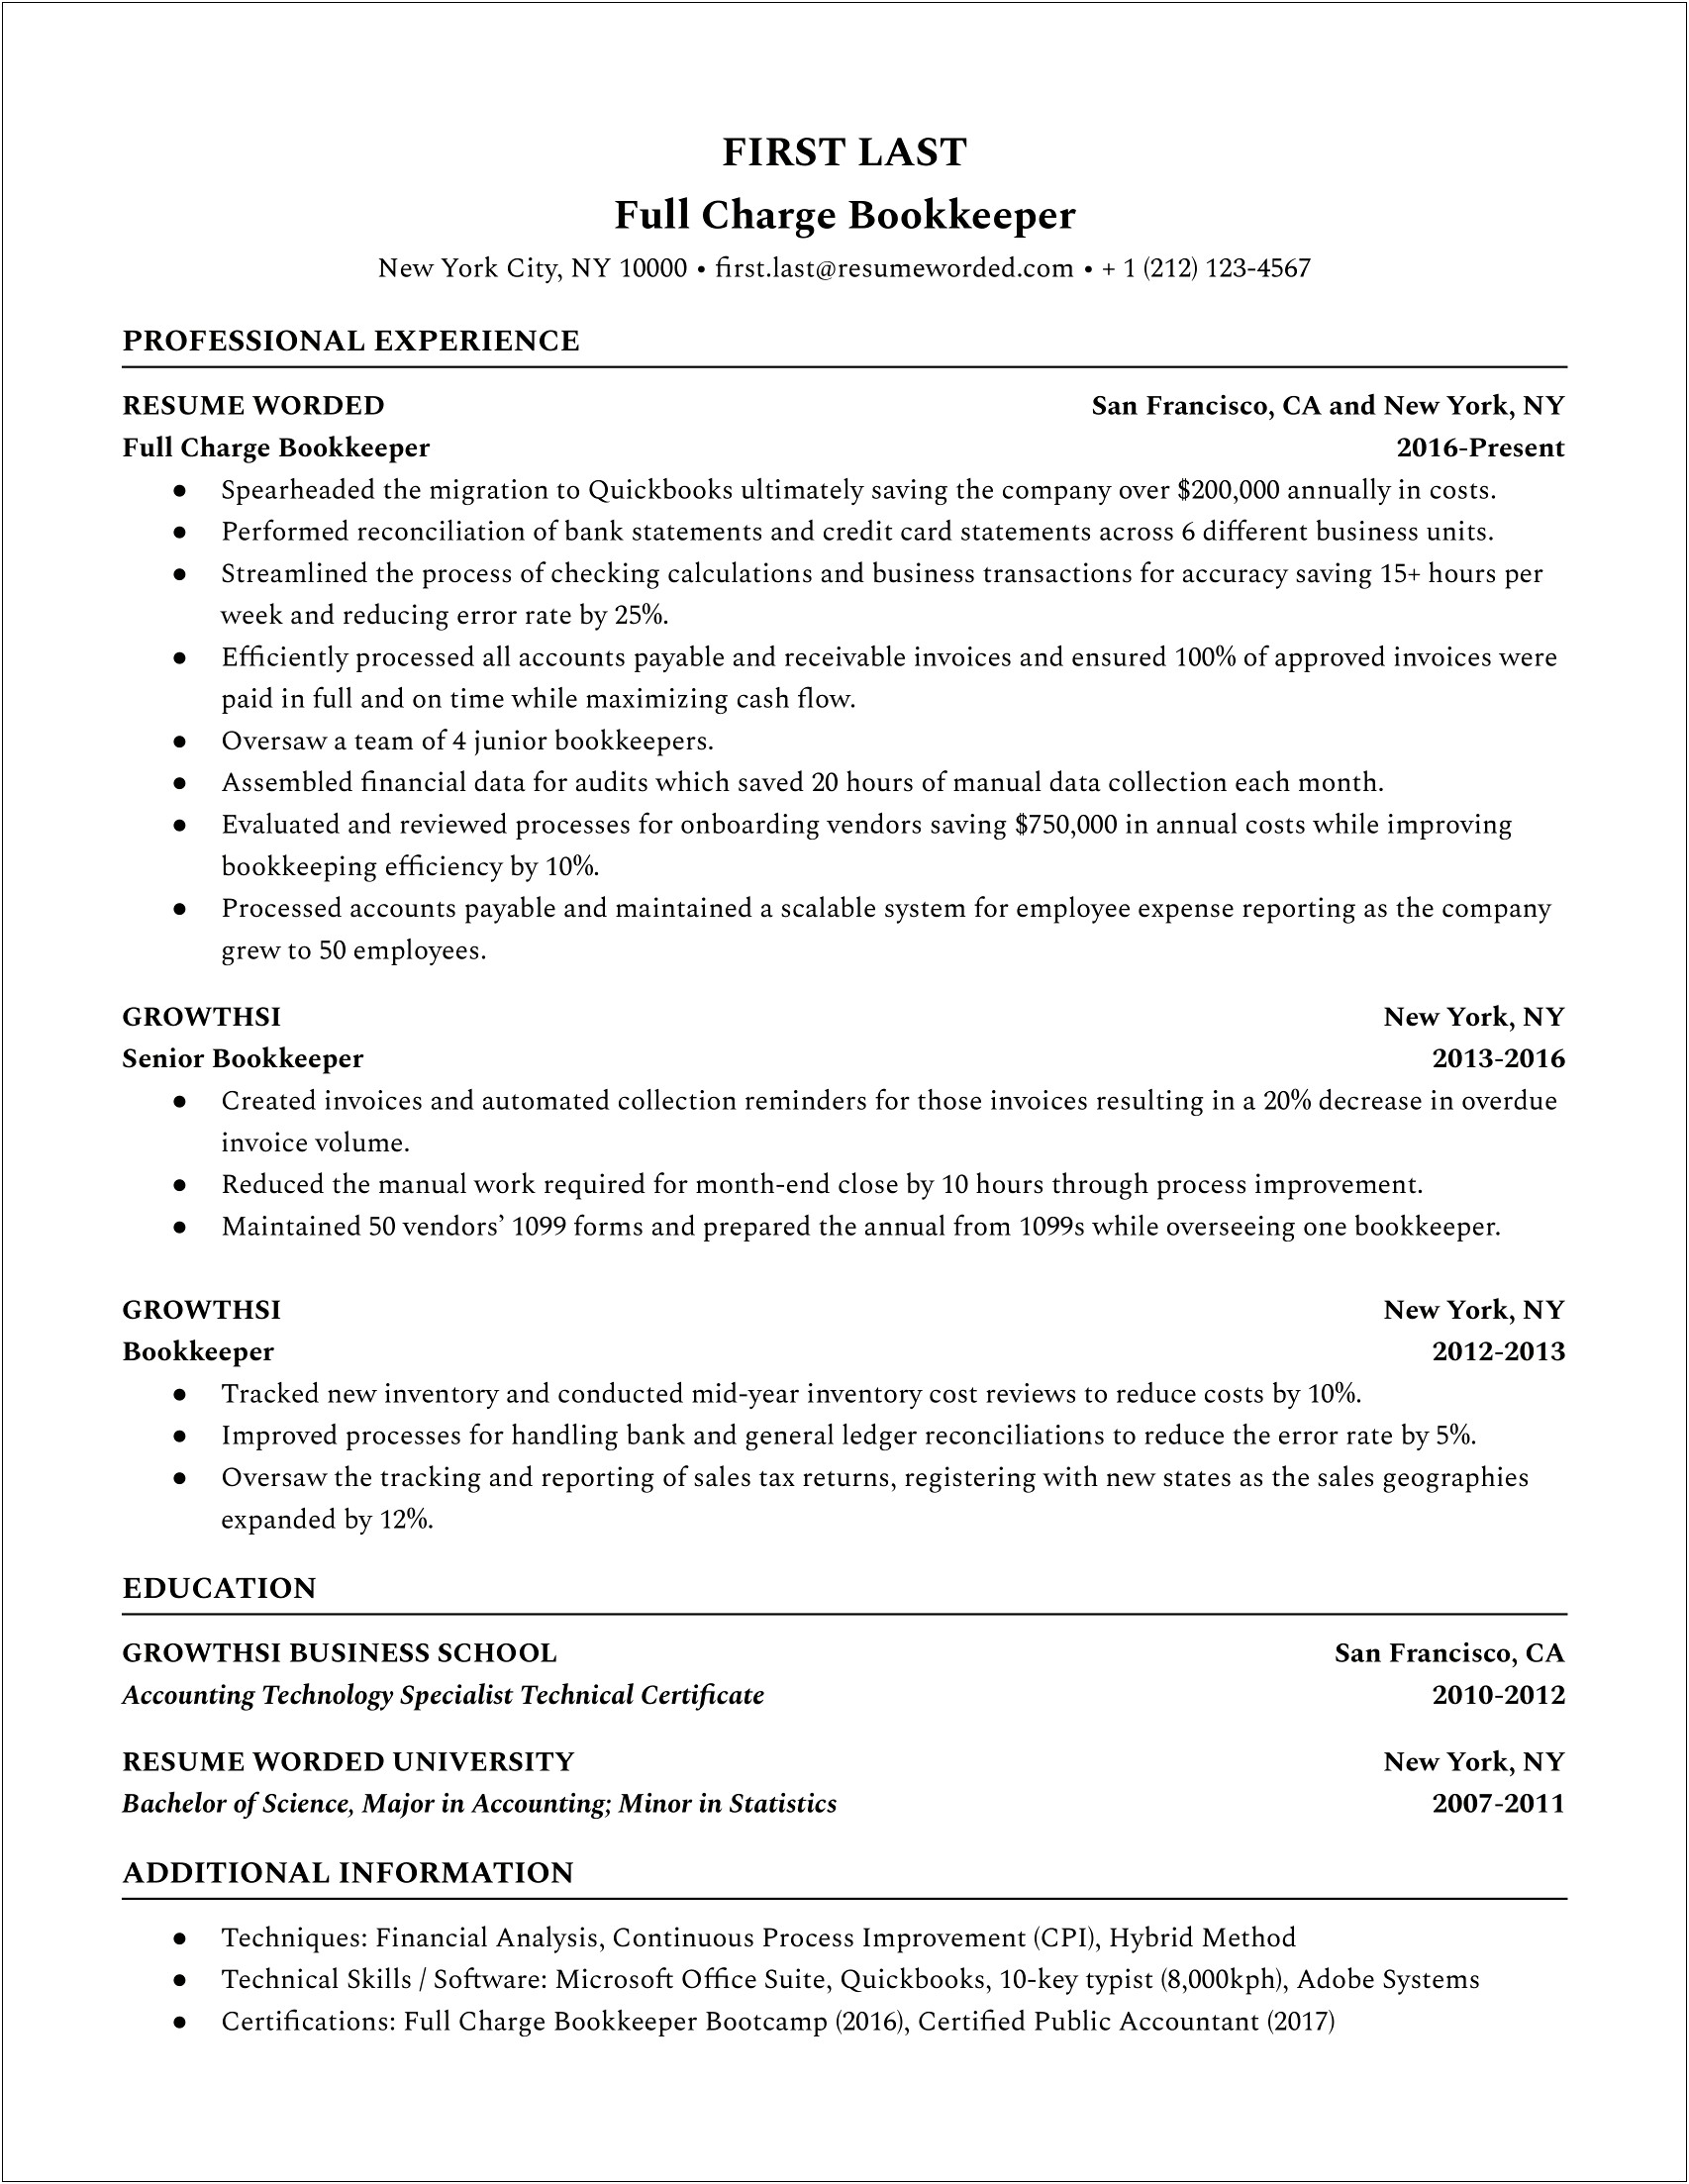 Resume Samples In Finance And Accounting